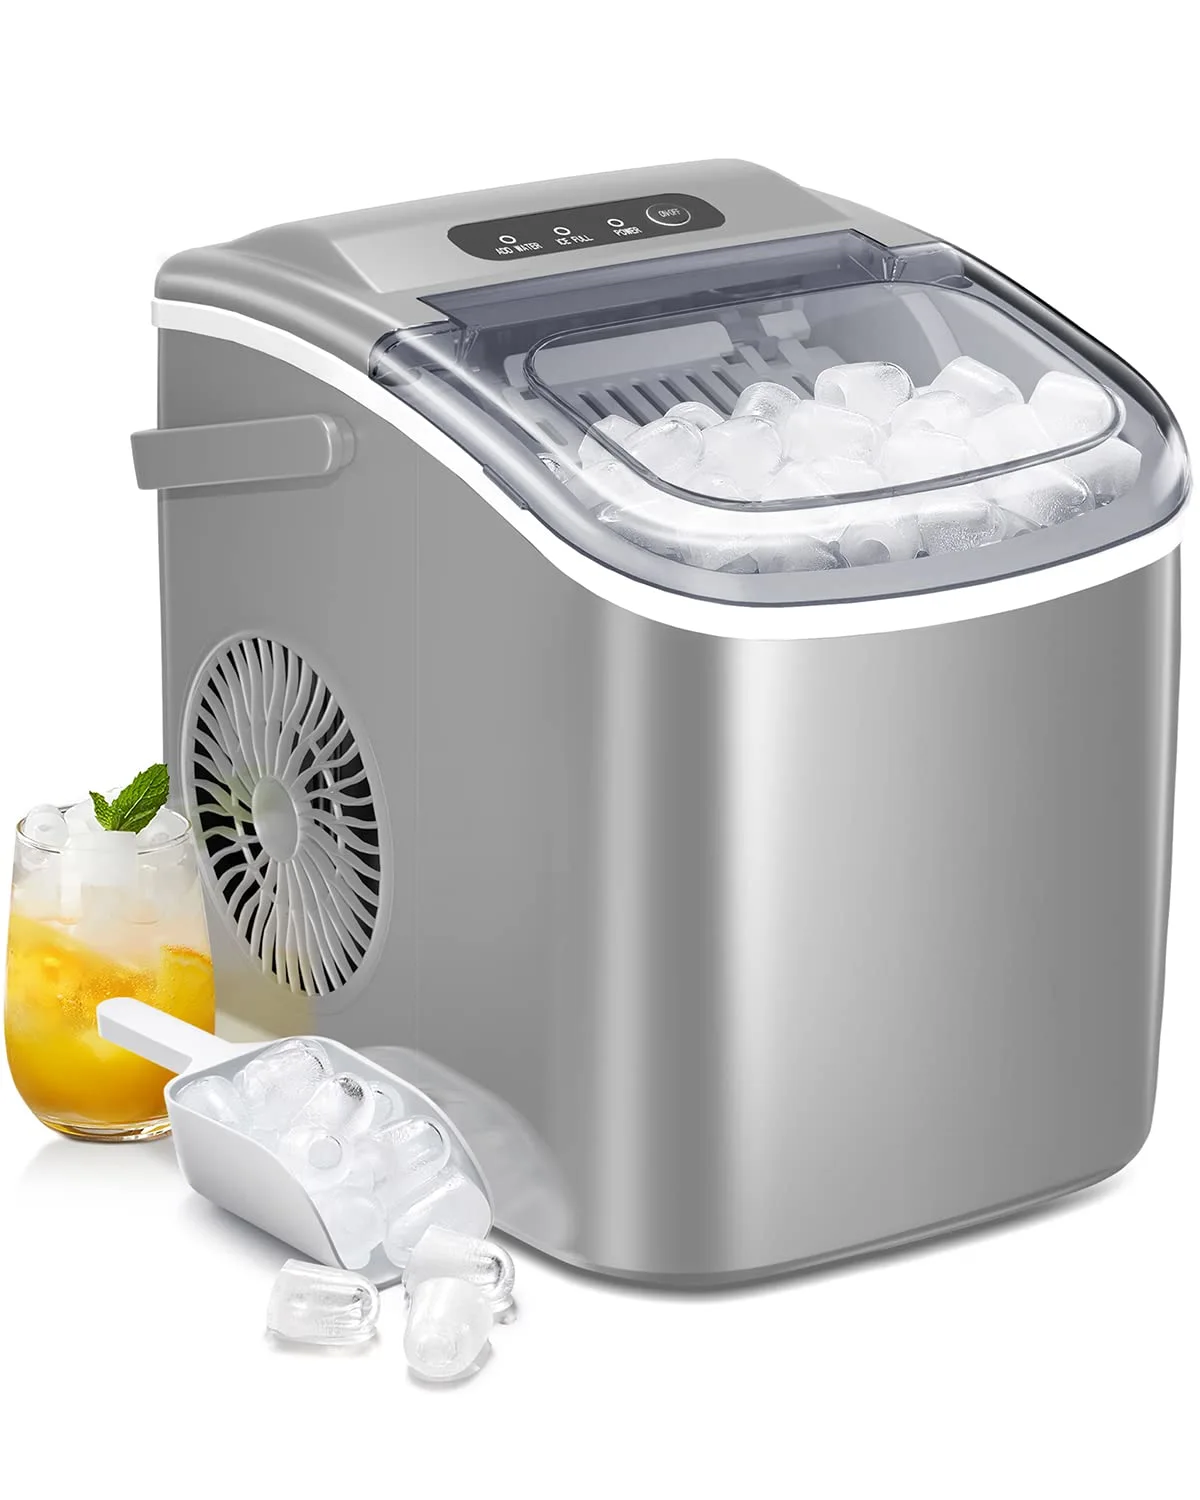 Ice Makers Countertop,Protable Ice Maker Machine with Handle,Self-Cleaning Ice Maker, 26Lbs/24H, 9 Ice Cubes Ready in 8 Mins, for Home/Office/Kitchen